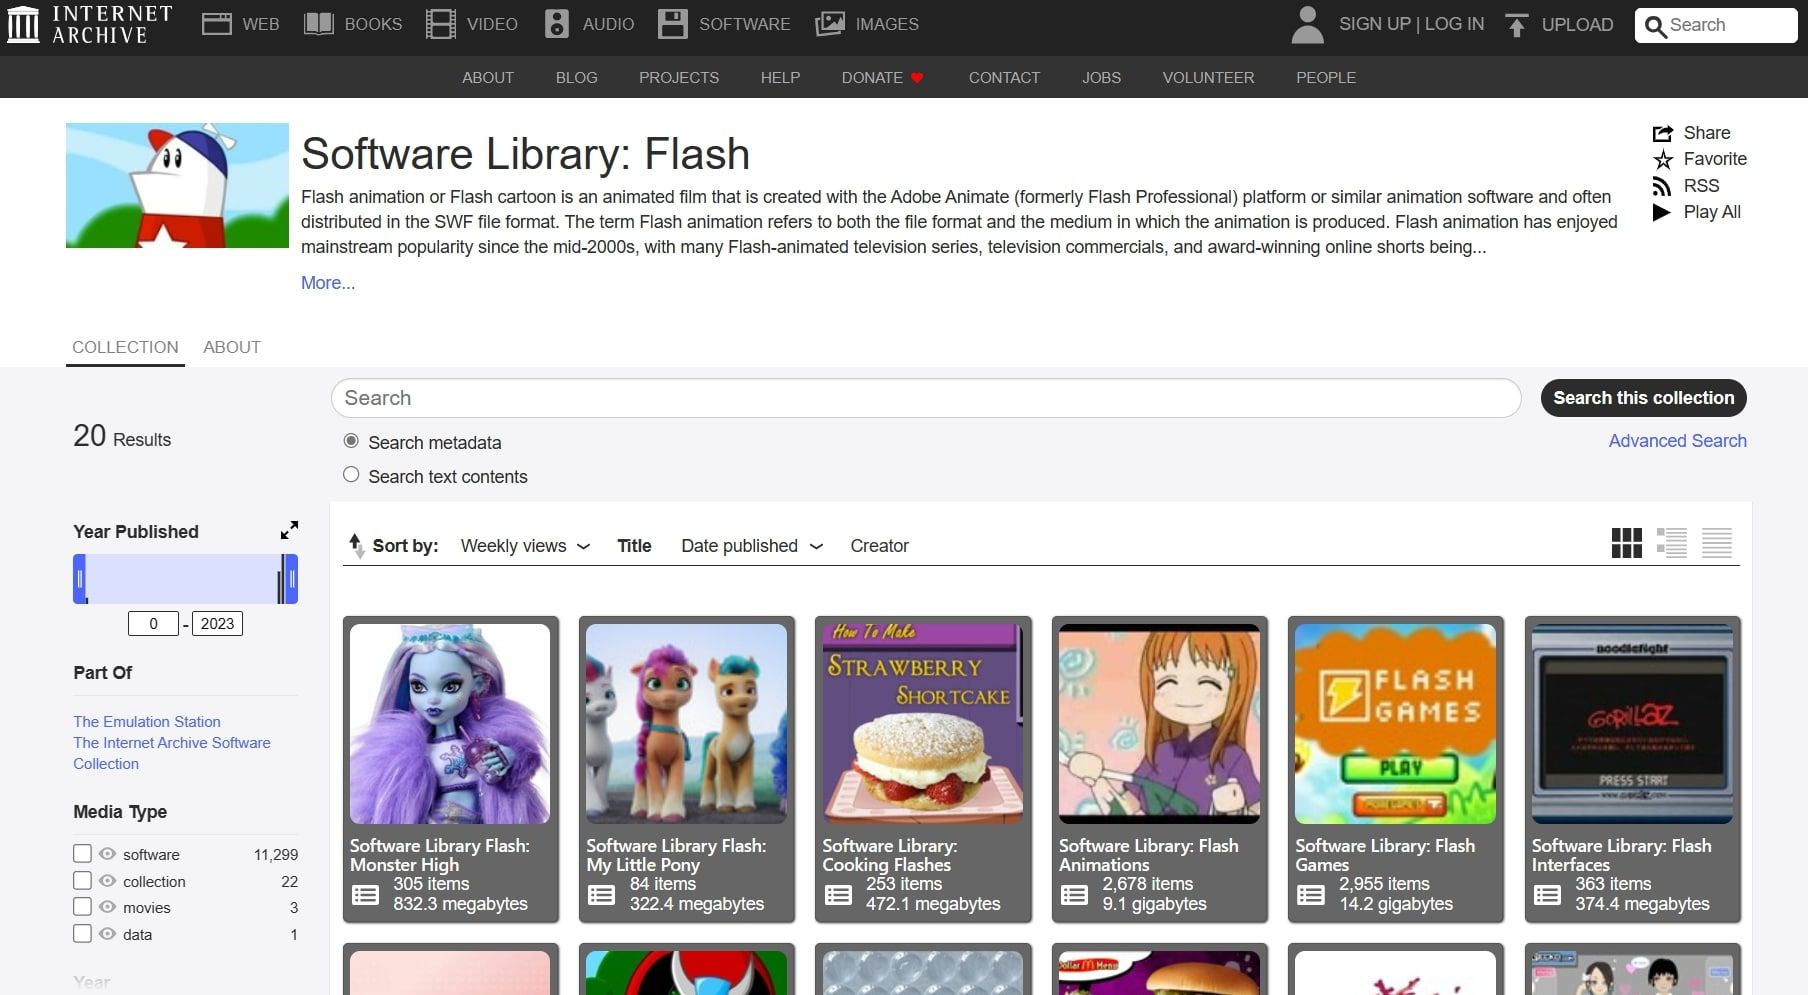 internet archive software library webpage screenshot